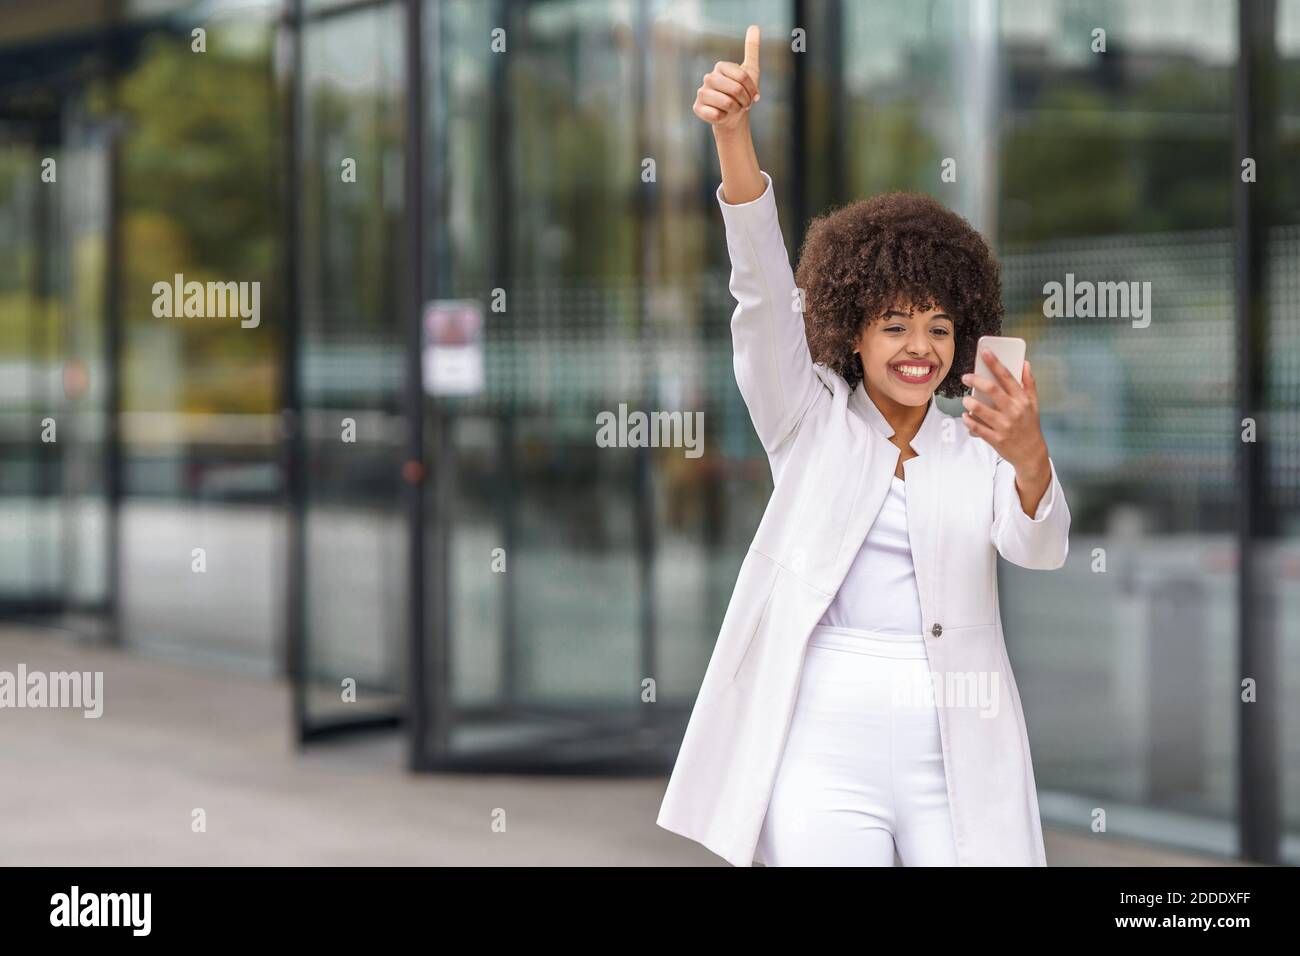 Businesswoman showing thumps up while using mobile phone outdoors Stock Photo